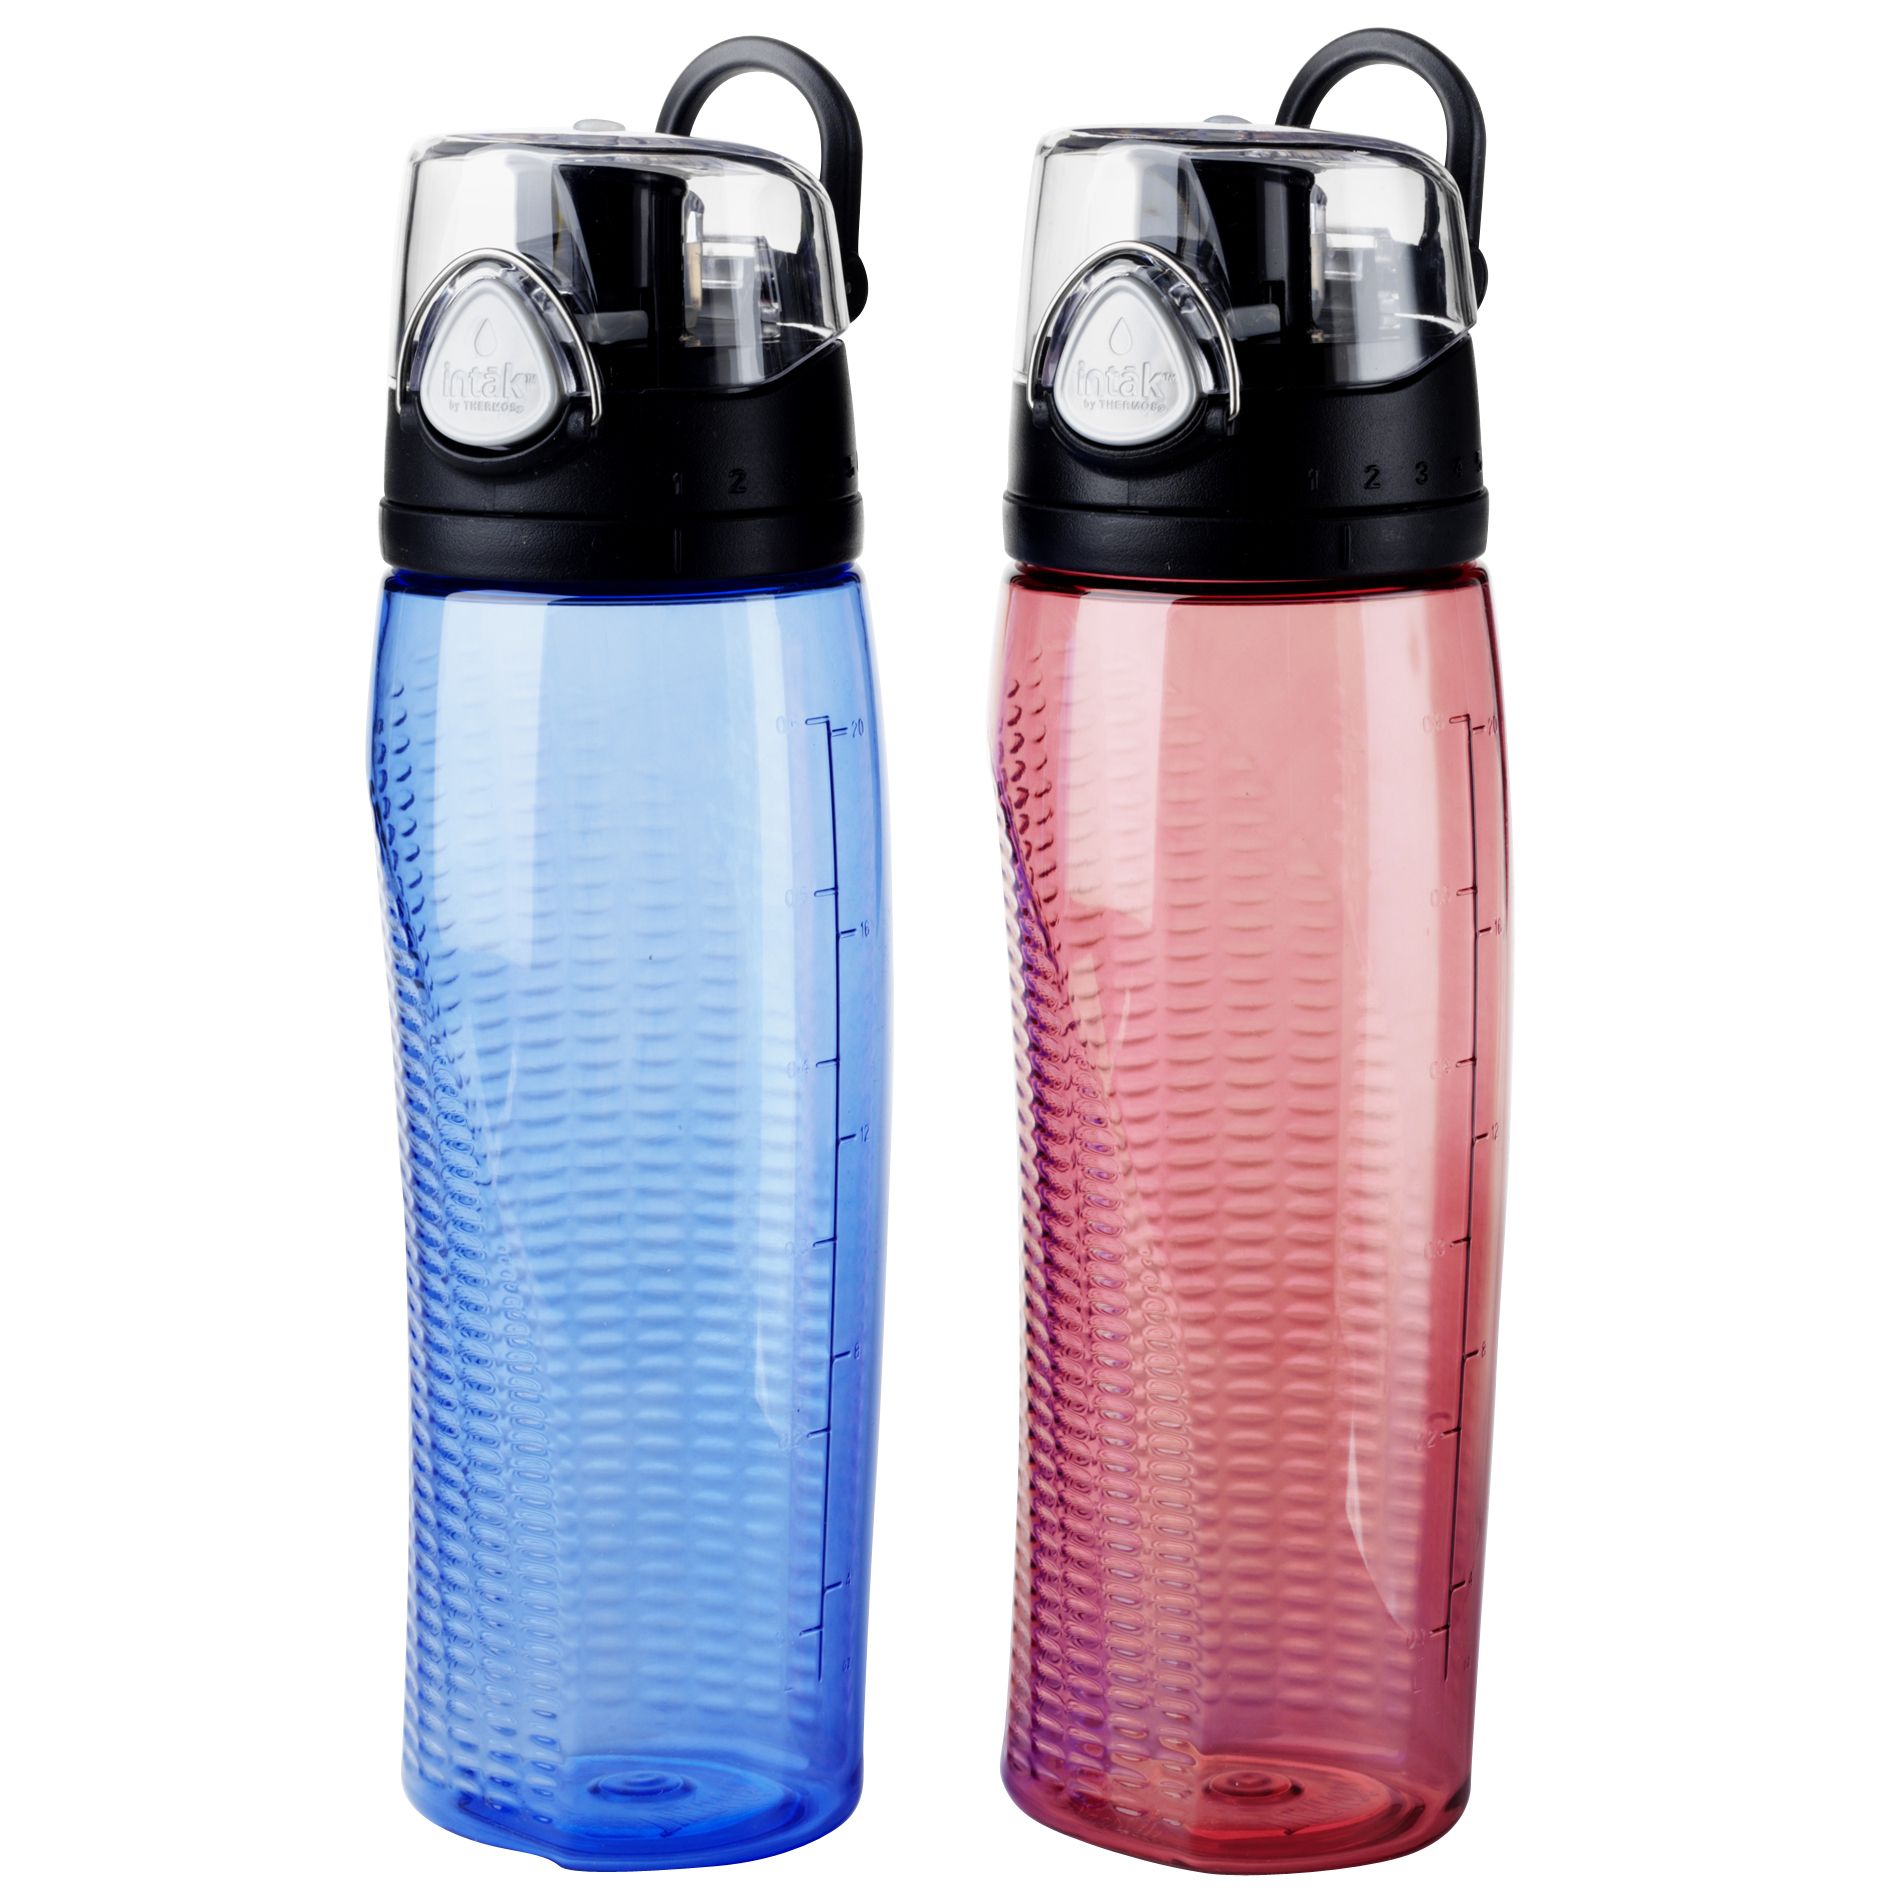 UPC 041205634614 product image for Thermos 24 Ounce Hydration Water Bottle - KING-SEELEY THERMOS/THERMOS | upcitemdb.com